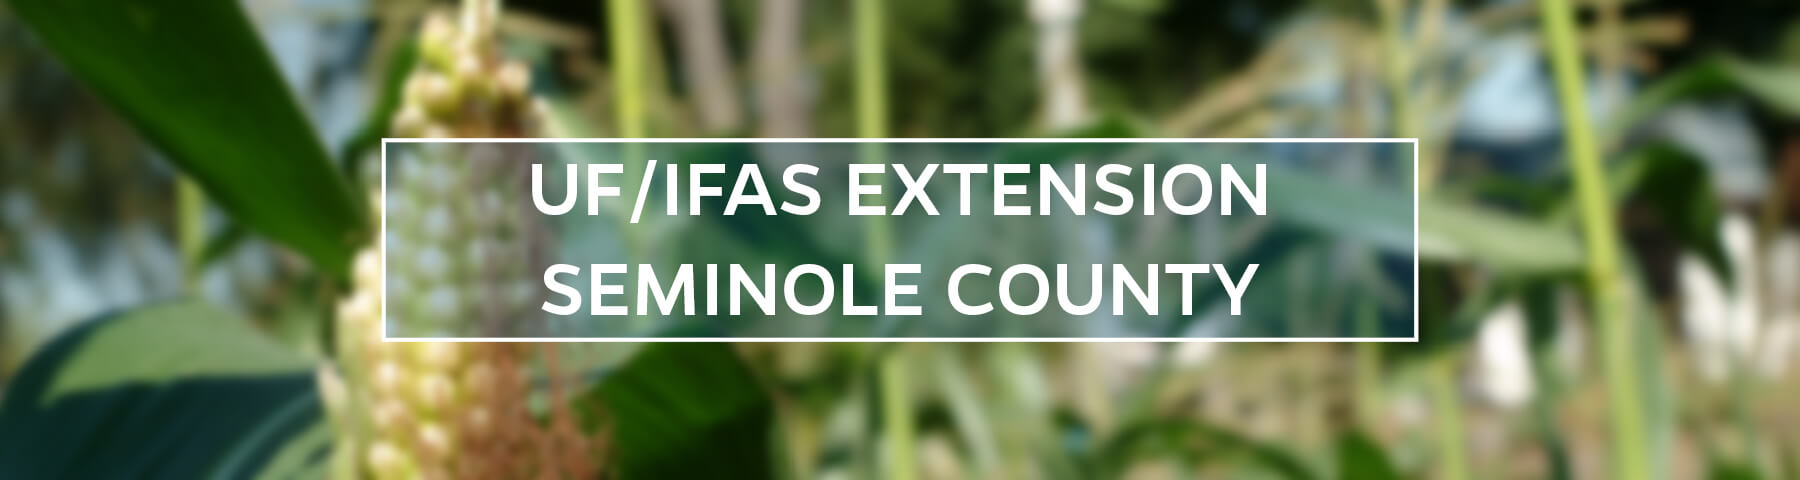 UF/IFAS Extension Seminole County